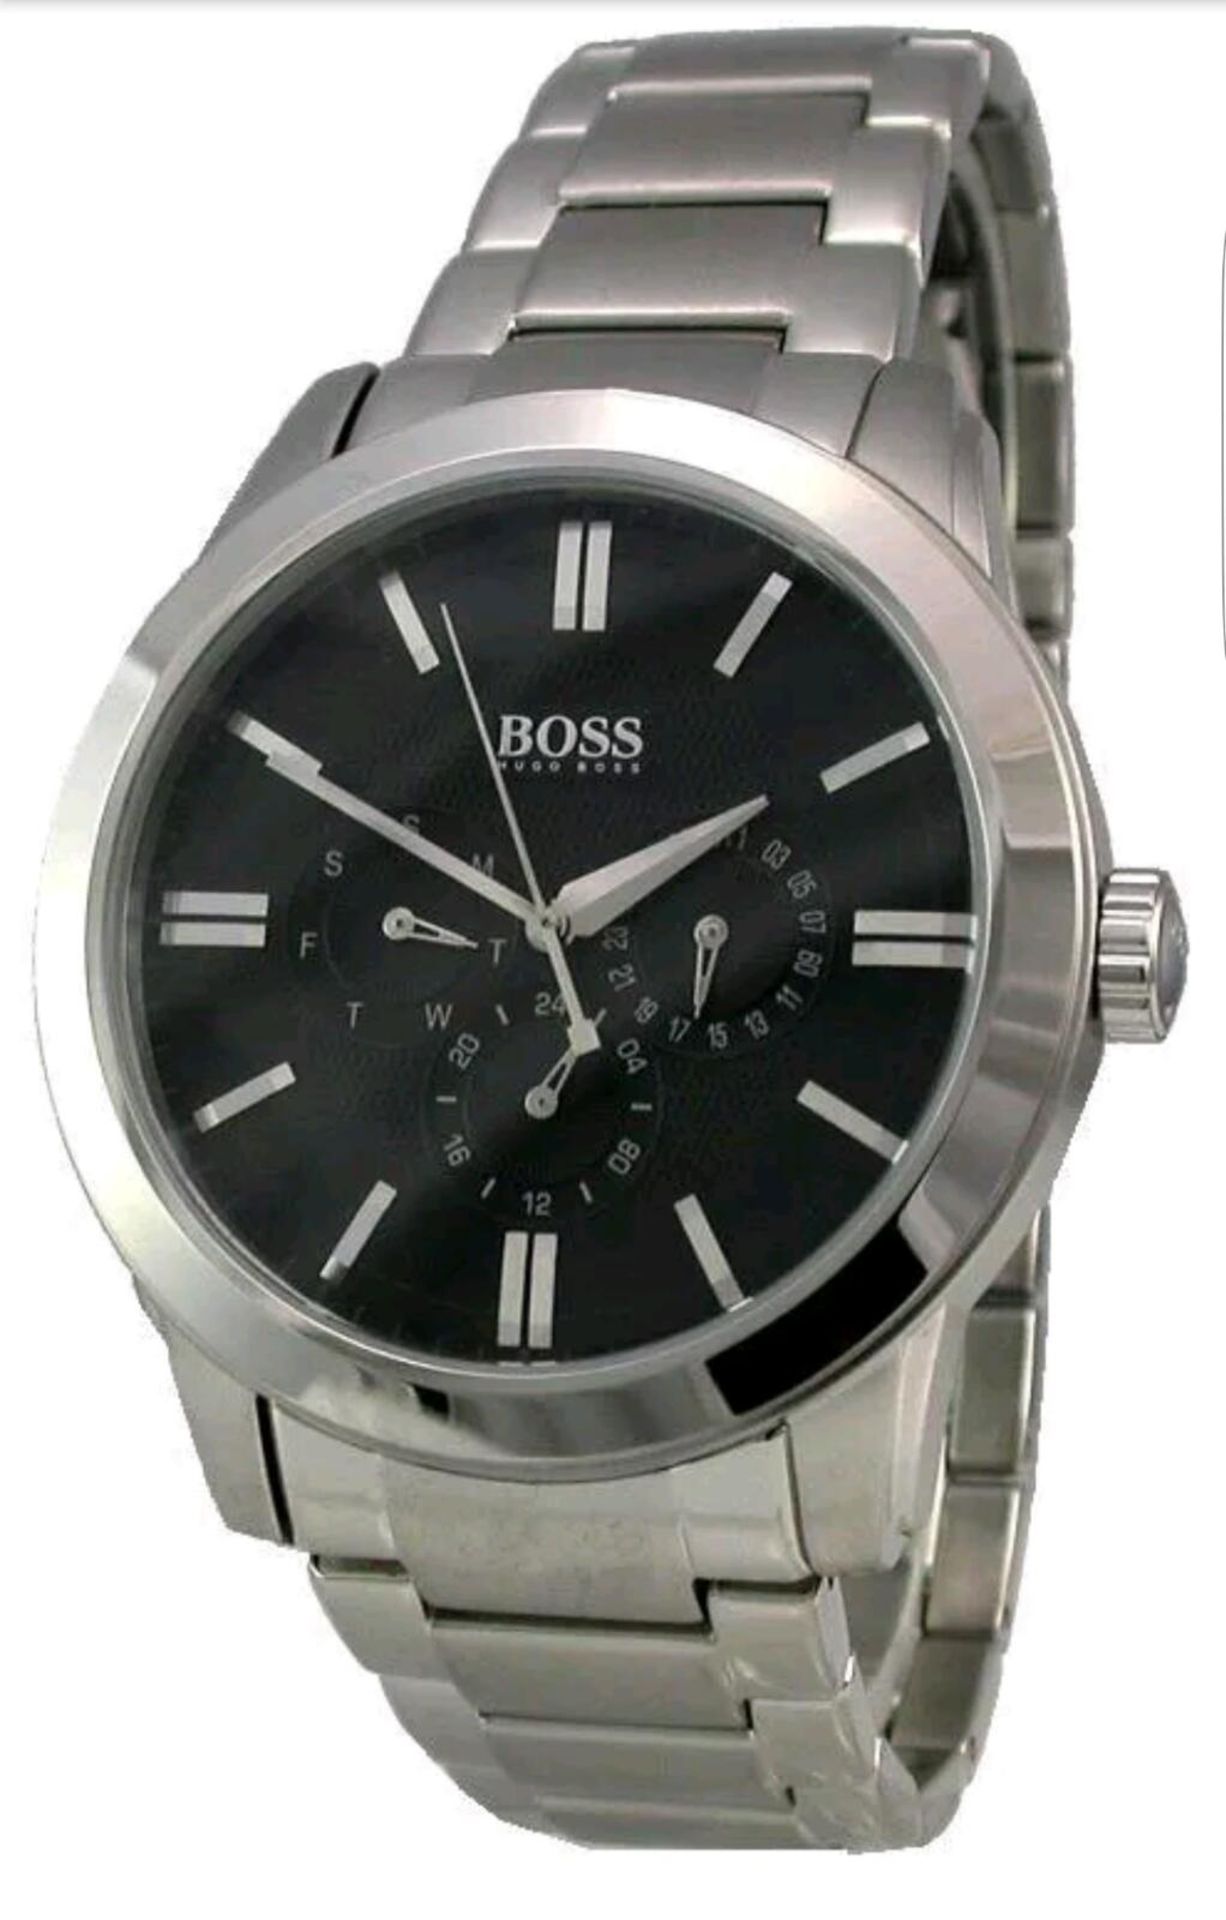 BRAND NEW HUGO BOSS 1512893, COMPLETE WITH ORIGINAL BOX AND MANUAL